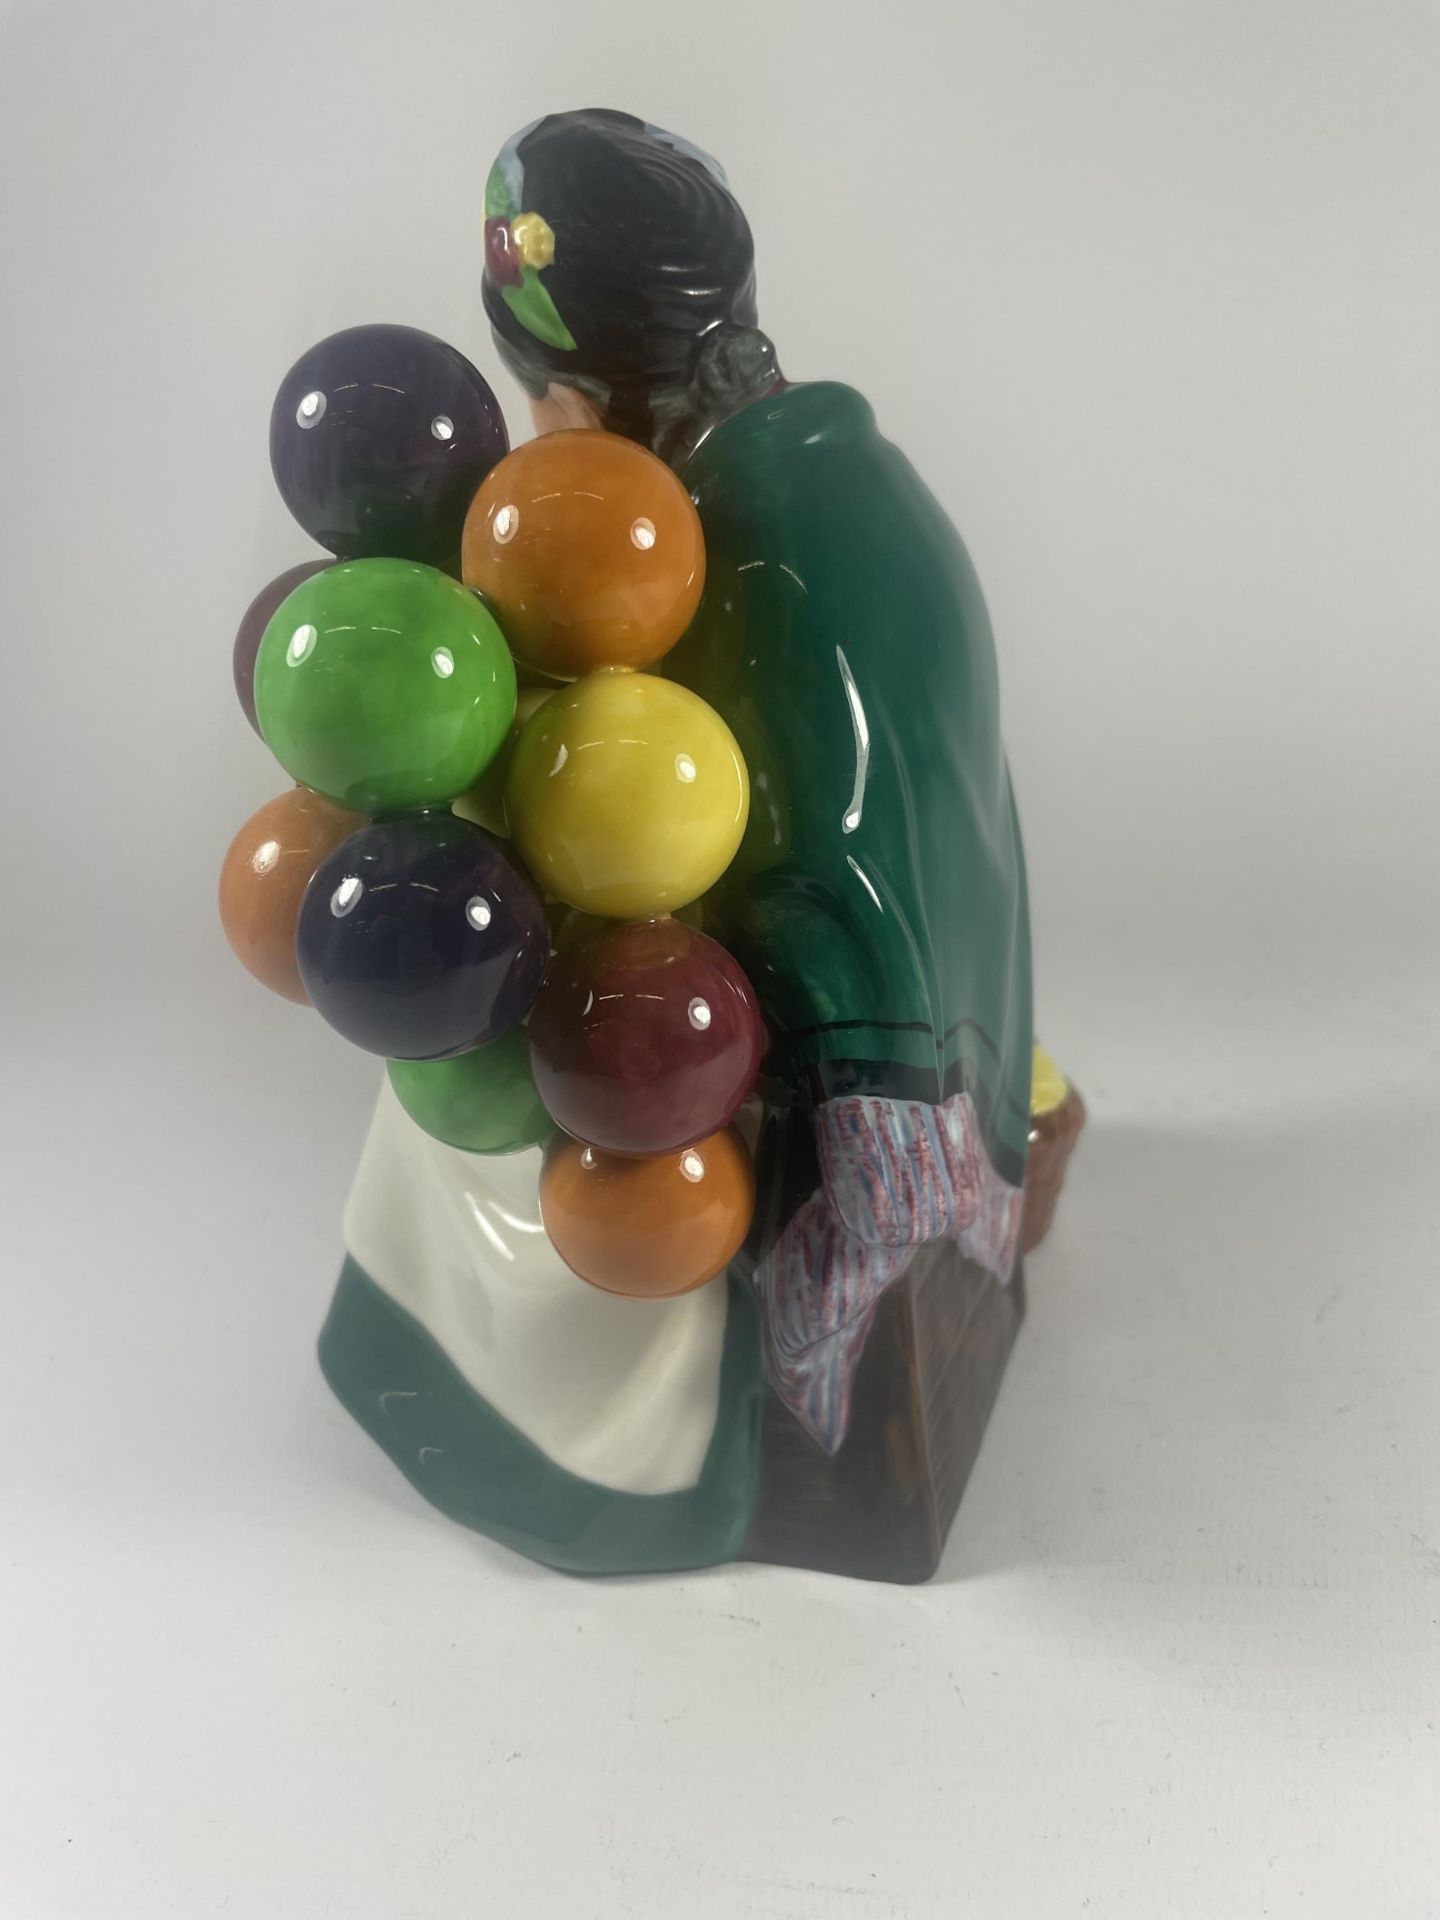 A ROYAL DOULTON THE OLD BALLOON SELLER HN1315 CHARACTER FIGURE - Image 2 of 5